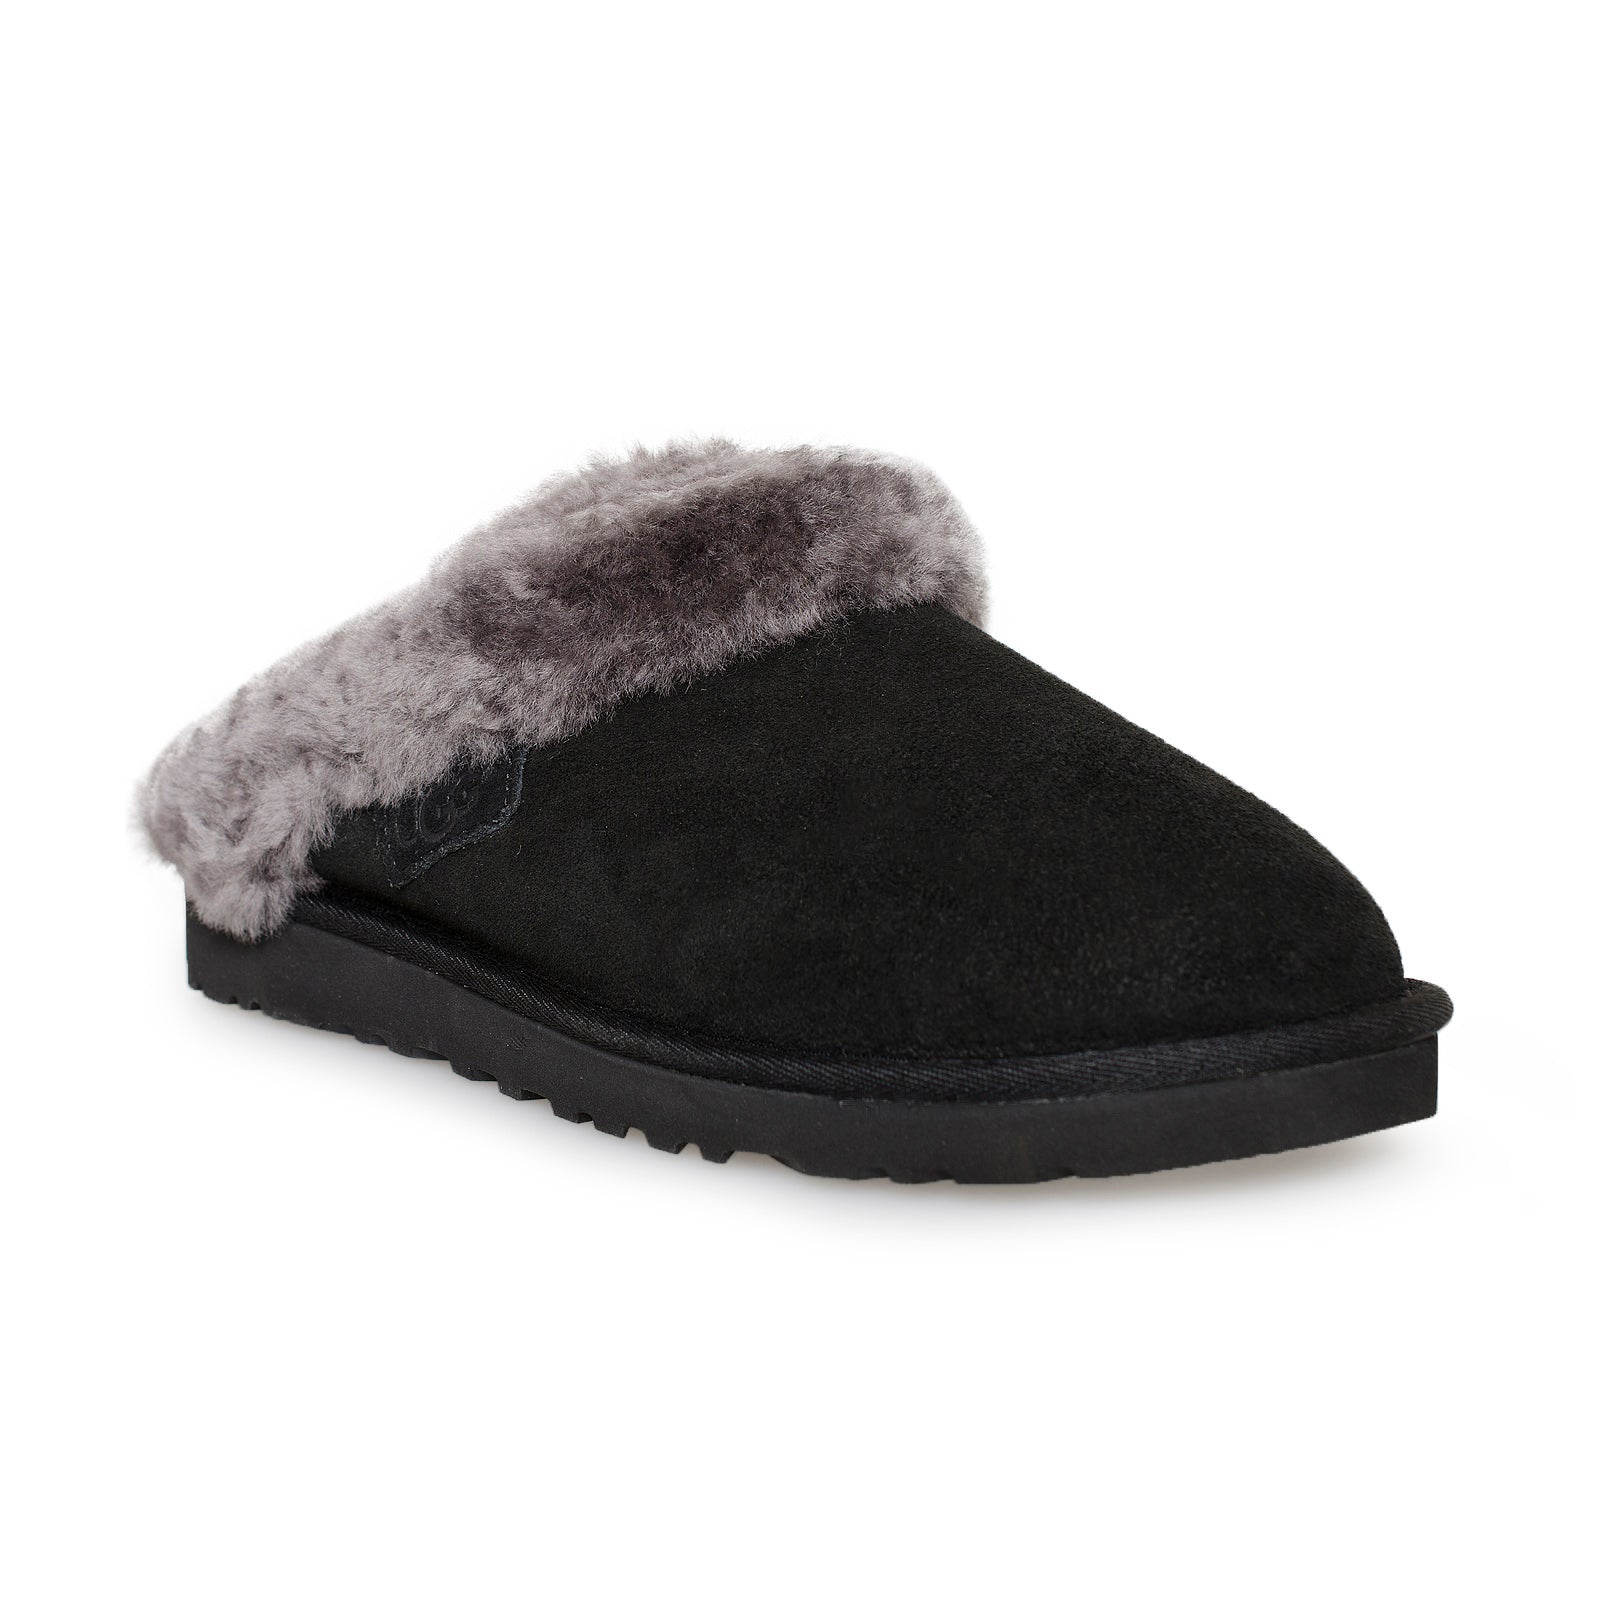 UGG Cluggette Black Slippers - Women's – MyCozyBoots